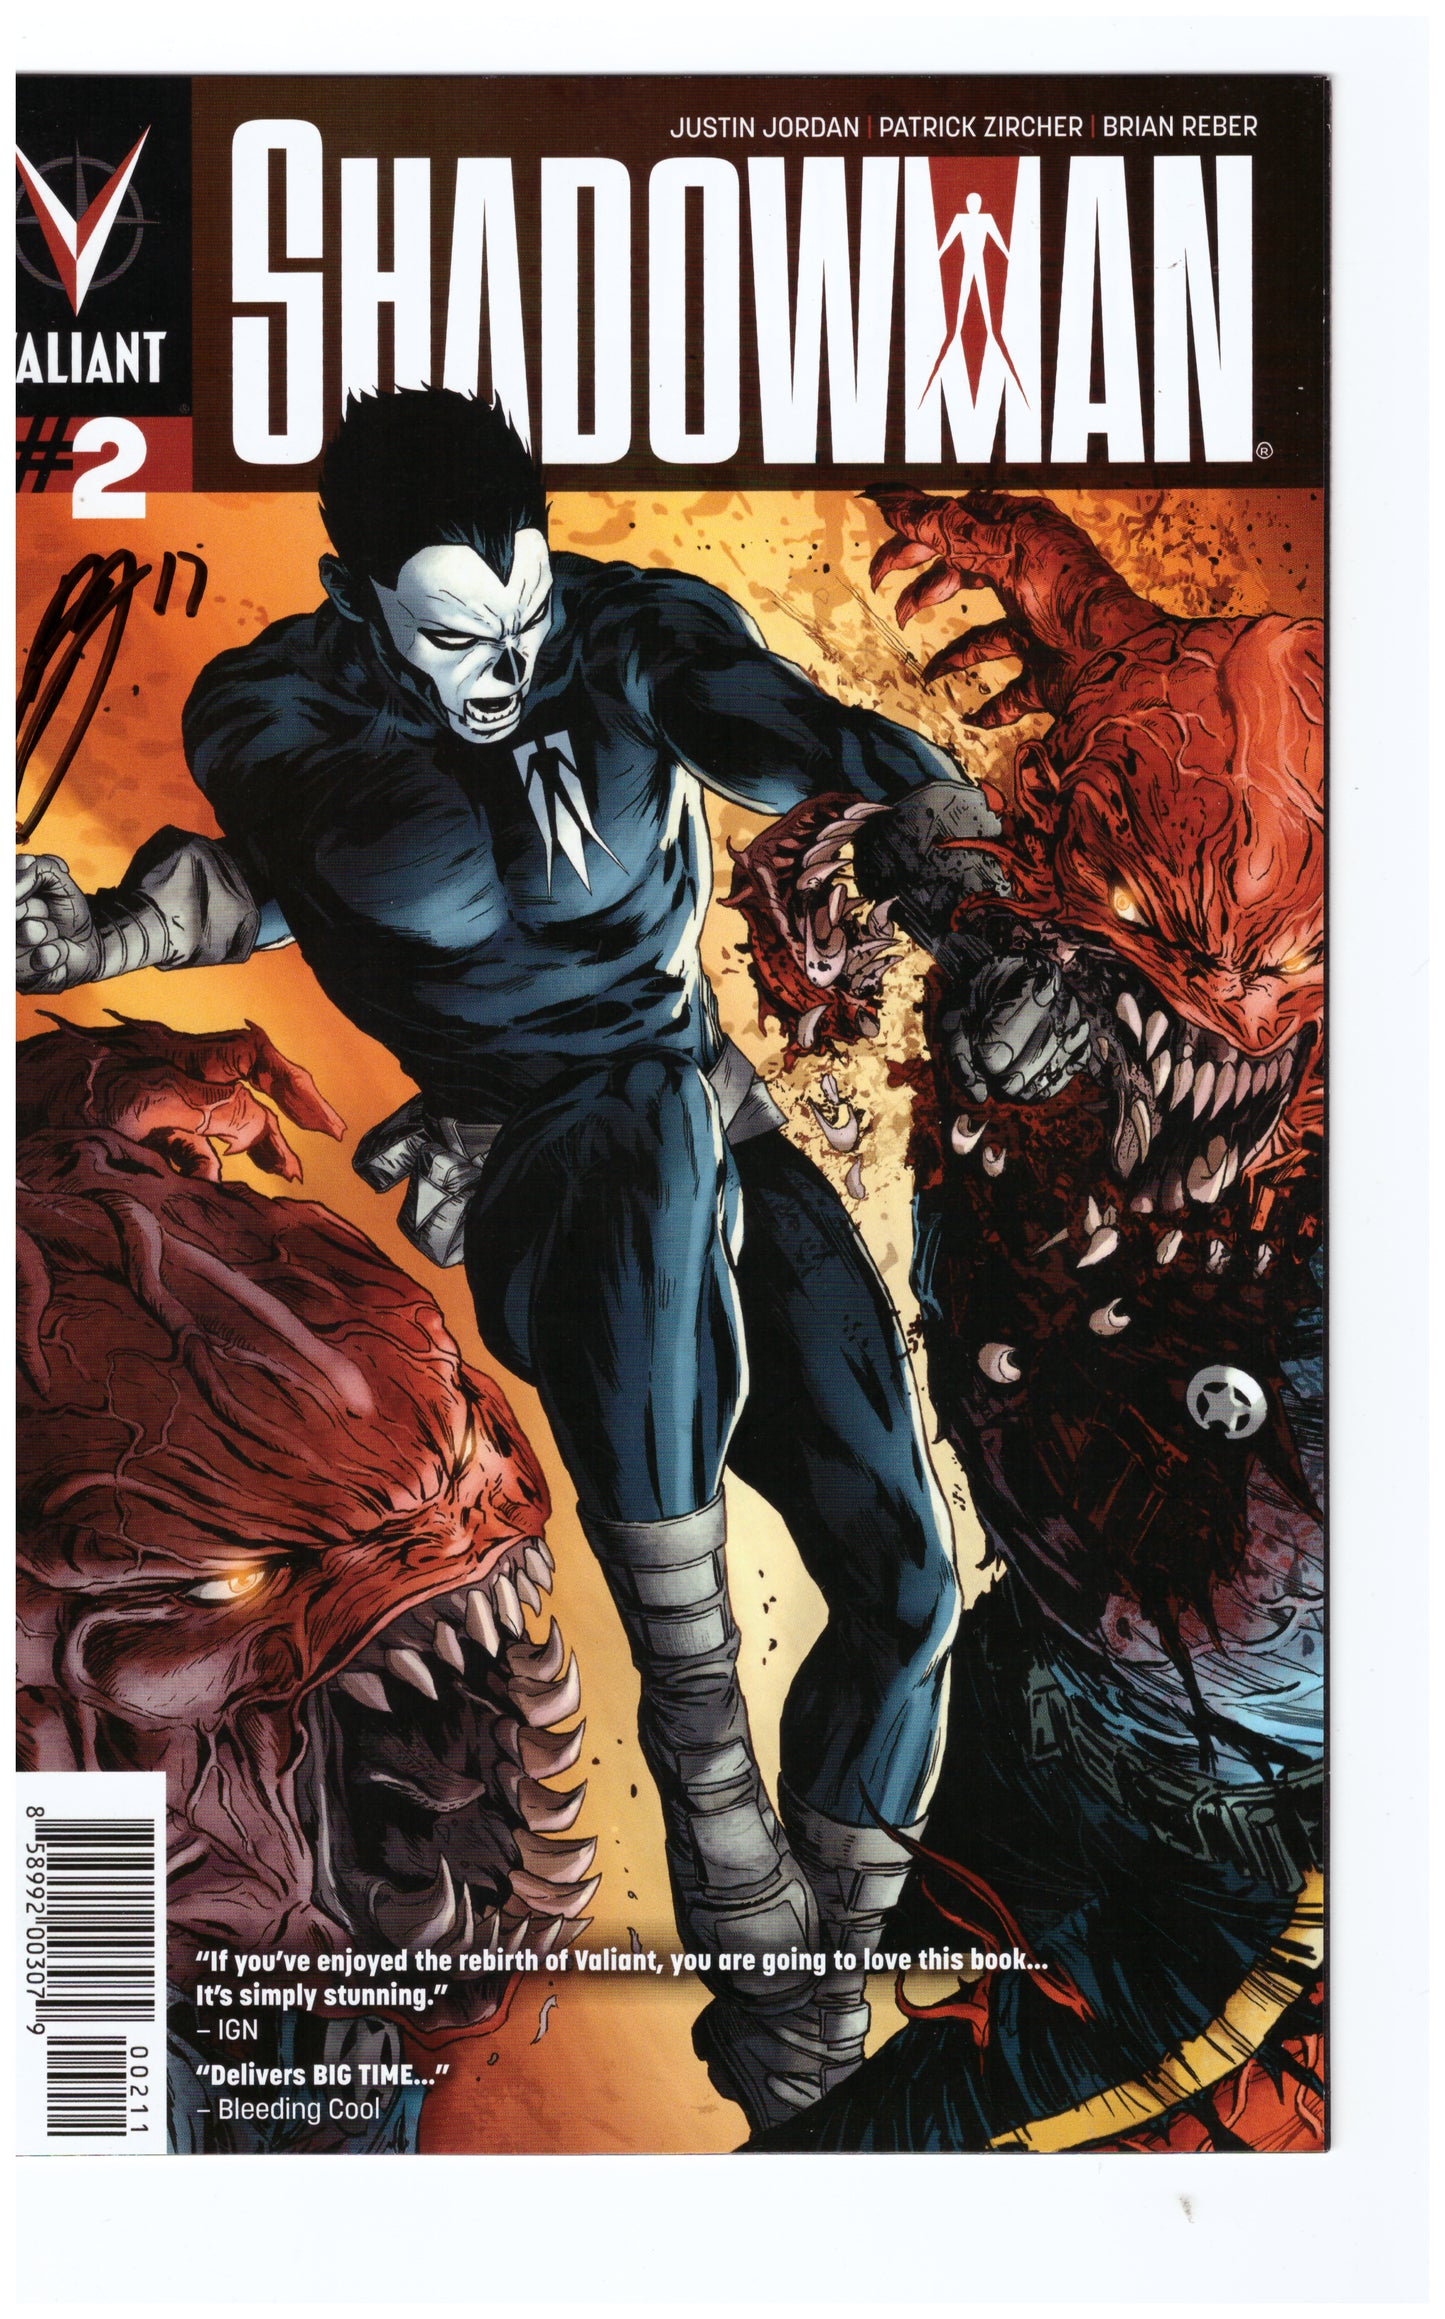 Shadowman (2012) #2 Signed